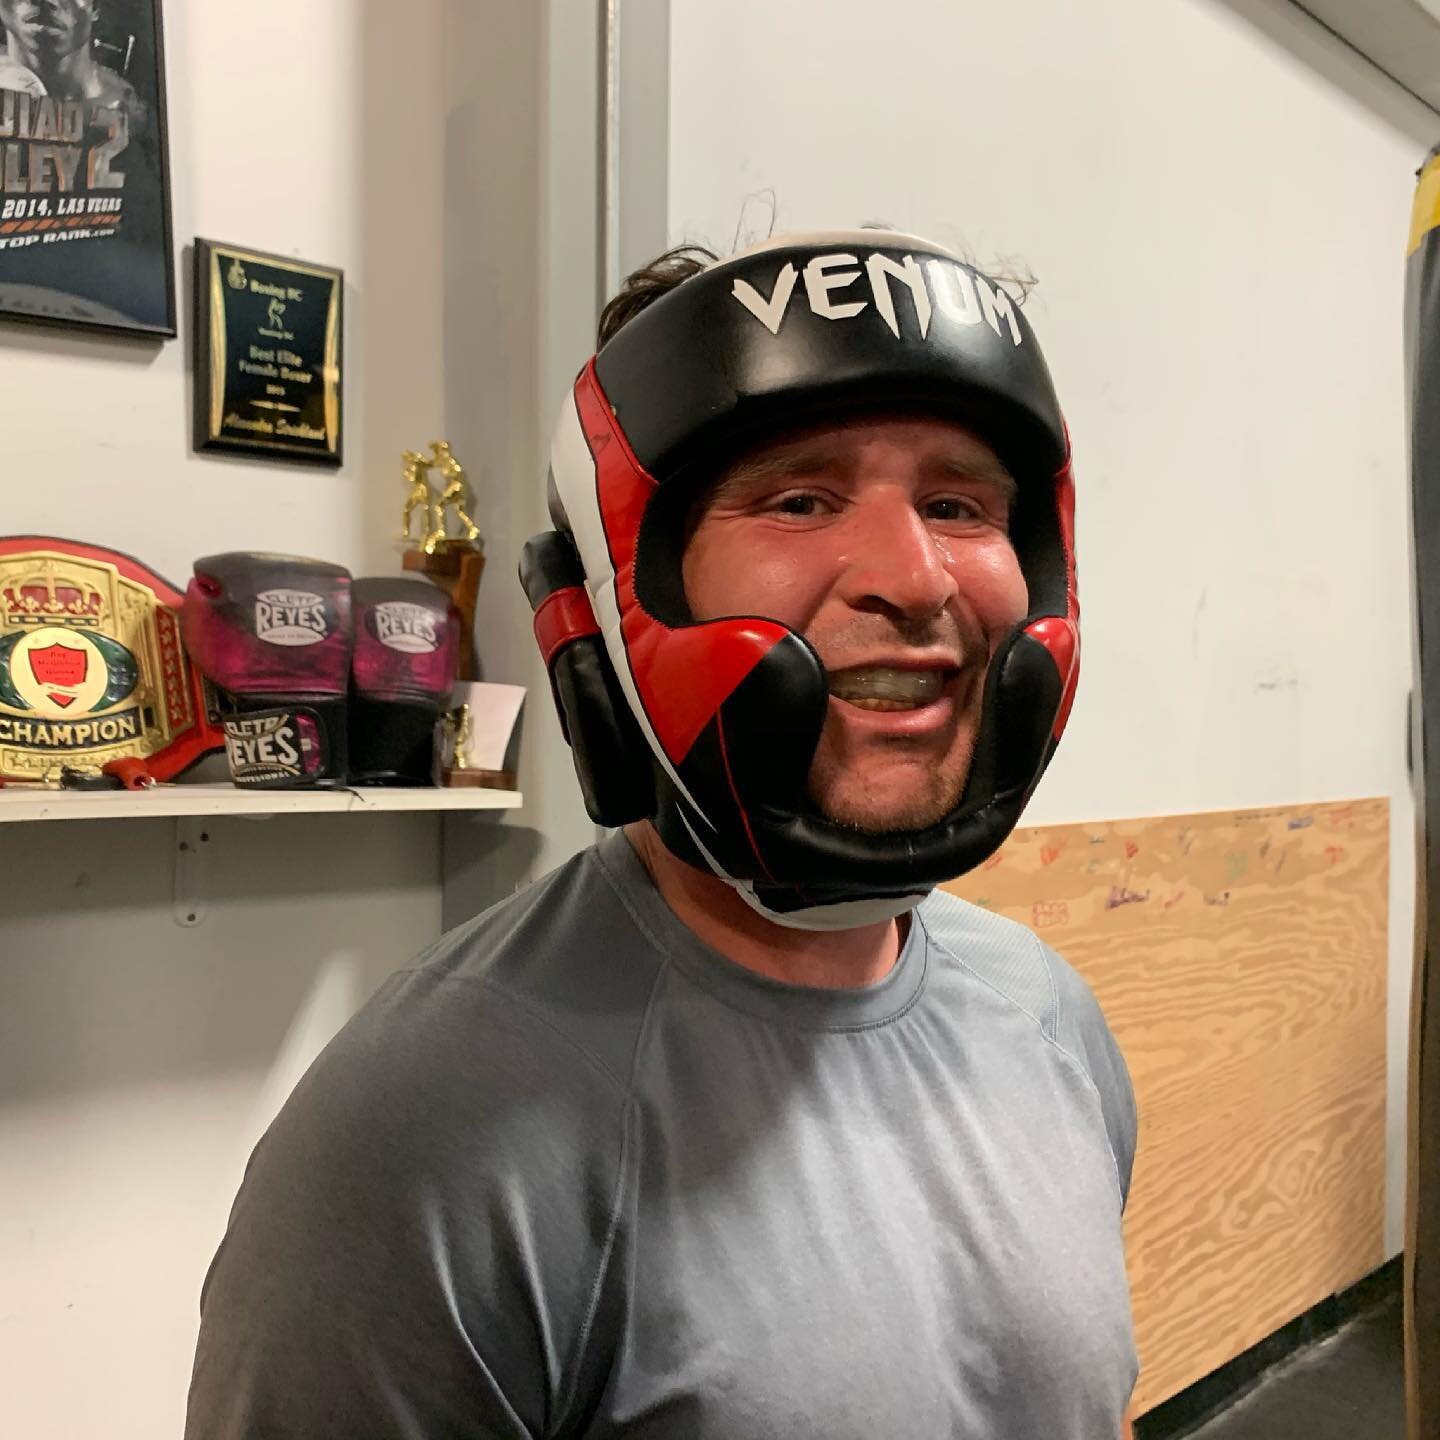 Sparring isn&rsquo;t always so serious 😂 we try to have fun too. 

#sparring #whysoserious #boxing #training #boxingtraining #boxingsparring #boxinggym #boxinggymlife #yyj #yyjbusiness #westshorebusiness